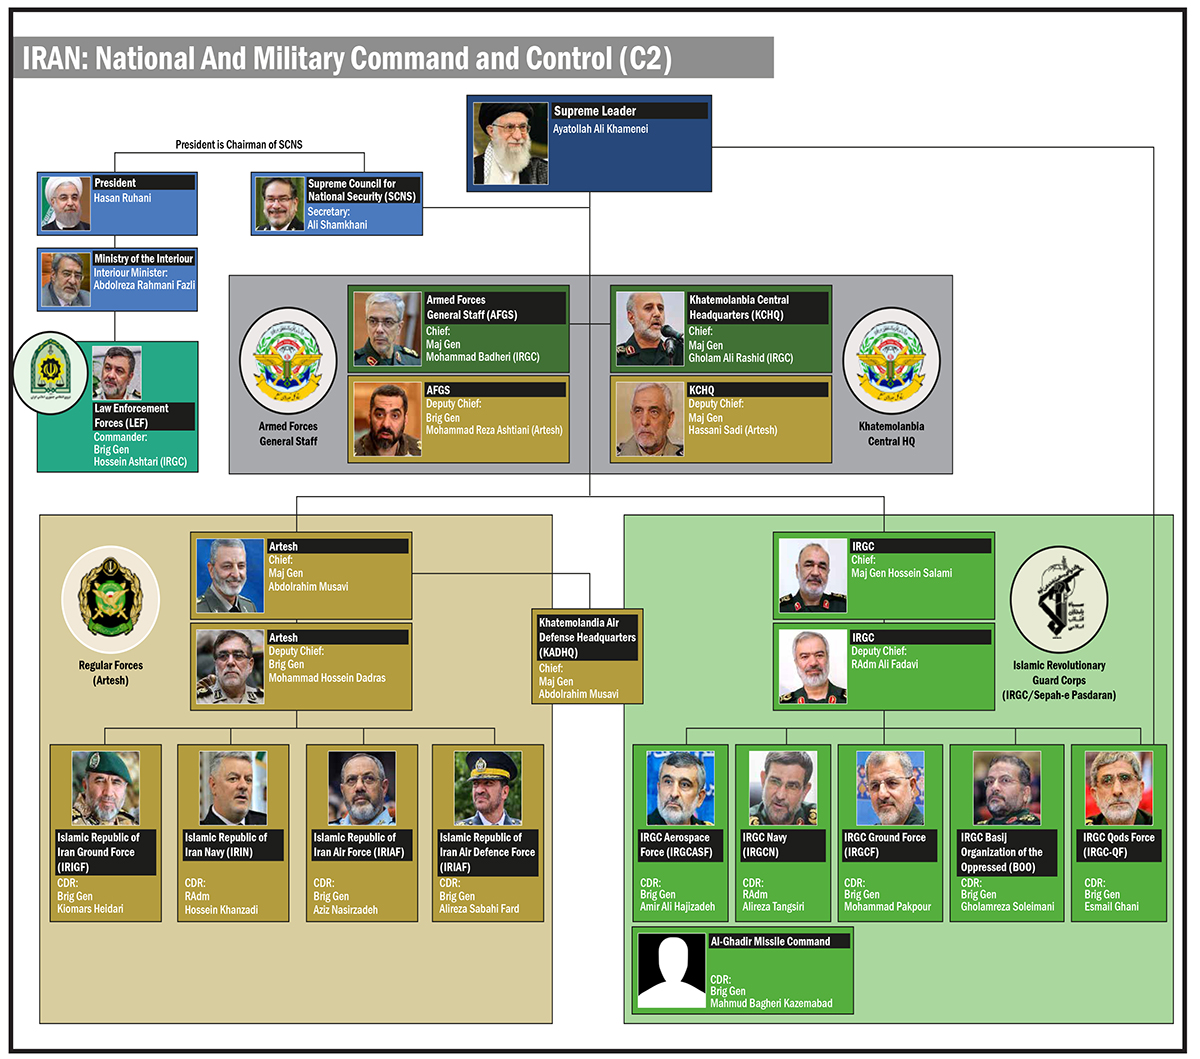 The image presents a  hierarchical chart of Iran’s National and Military Command and Control. The Supreme Leader Ayatollah Ali Khamenei is at the top and below it are three levels of civilian or military bodies which contain the names of senior leaders, their ranks, and areas of responsibility.